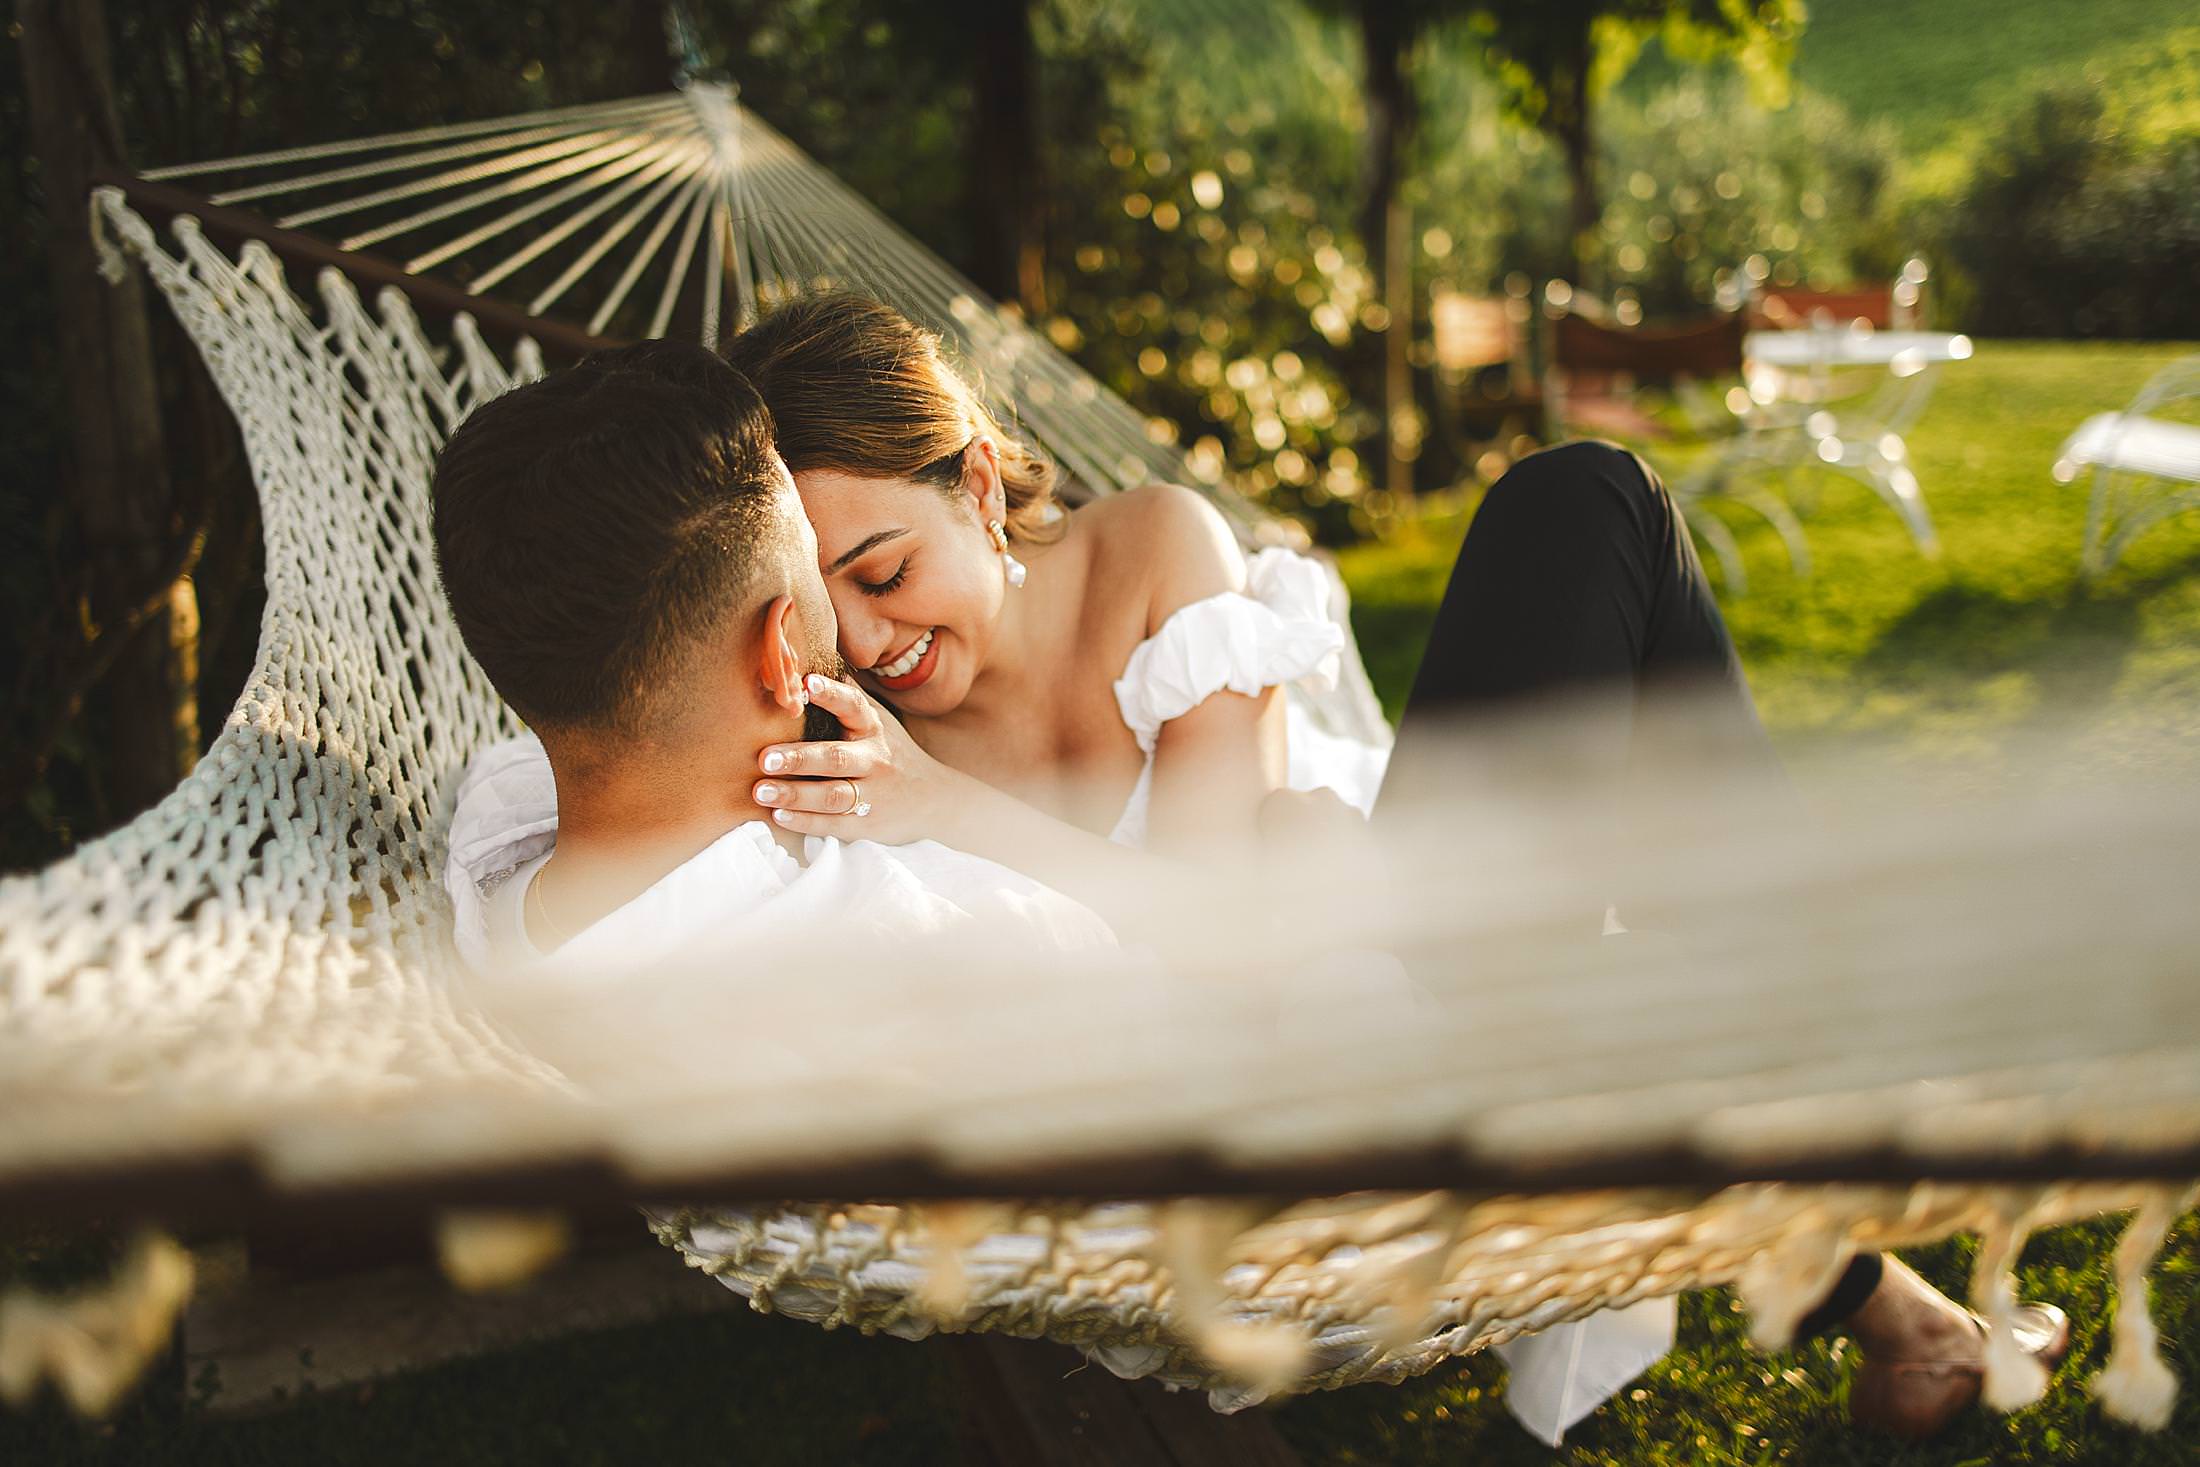 Elegant and classic wedding secret proposal in Chianti countryside at Borgo del Cabreo during golden hour